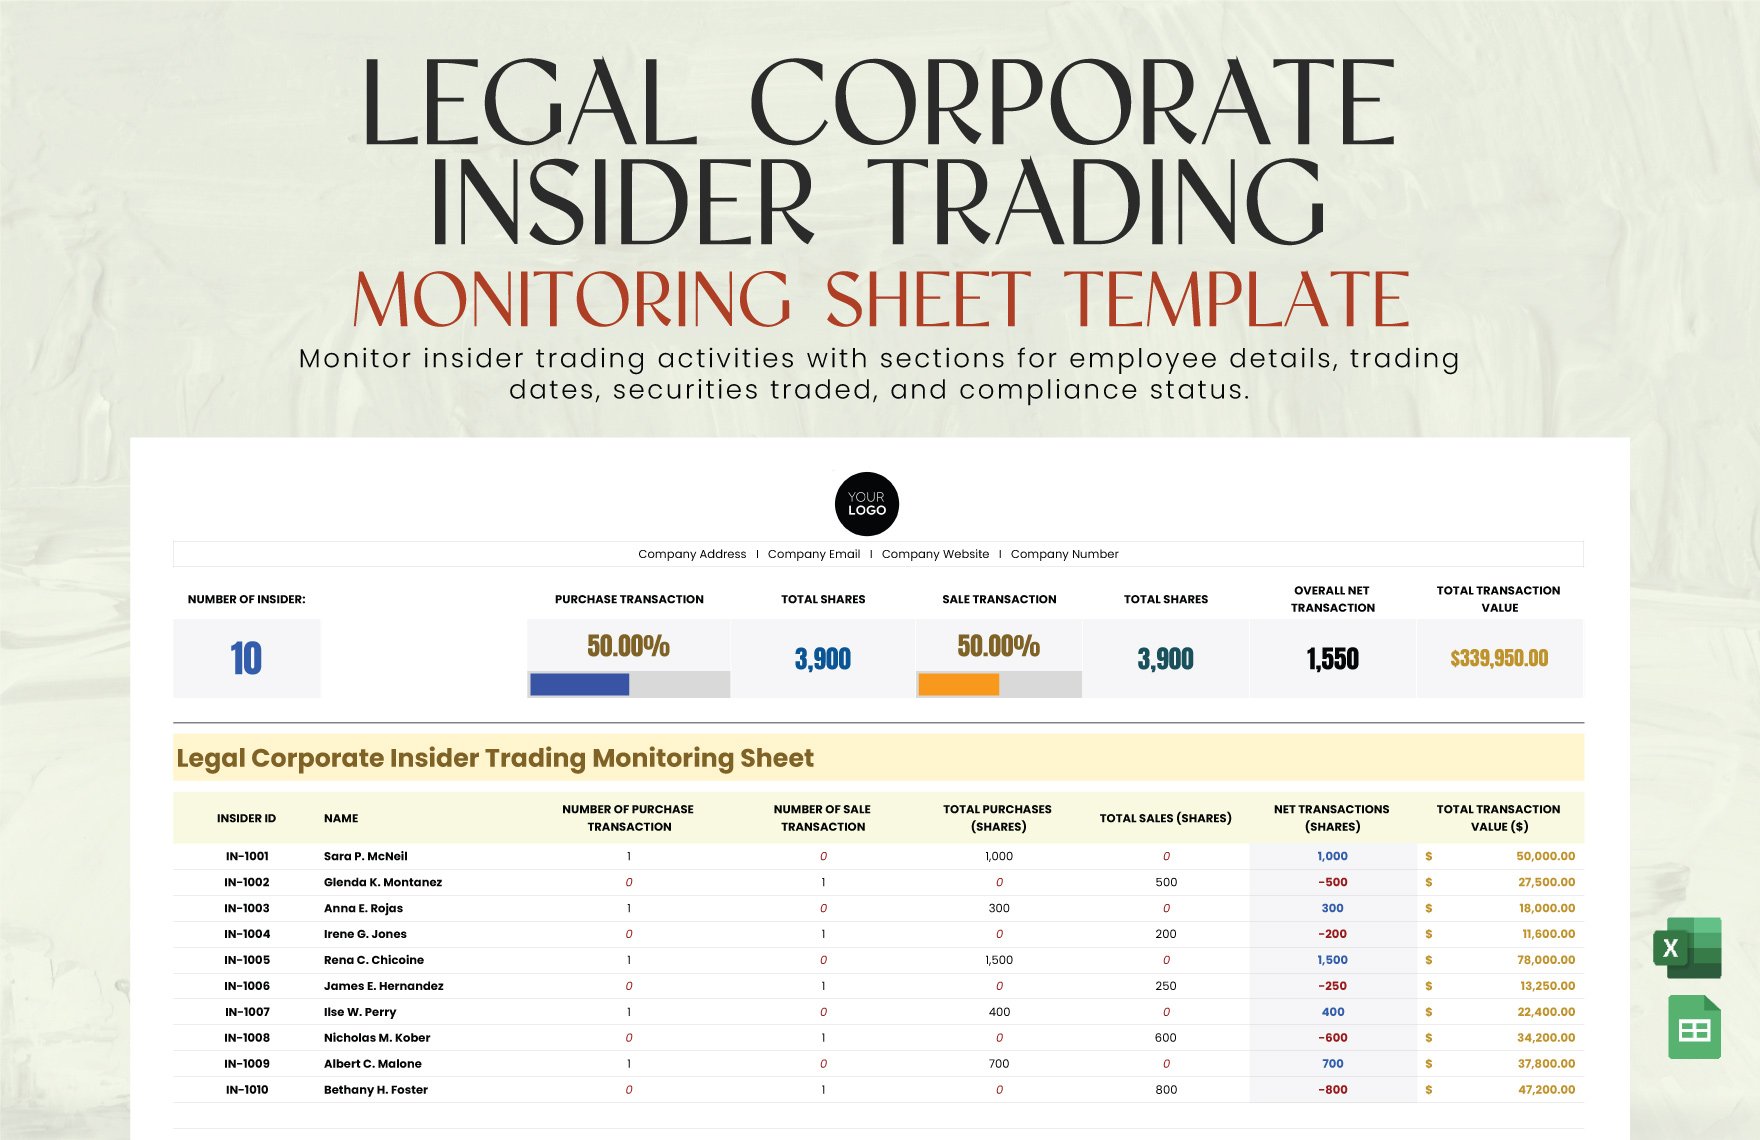 Legal Corporate Insider Trading Monitoring Sheet Template in Excel, Google Sheets